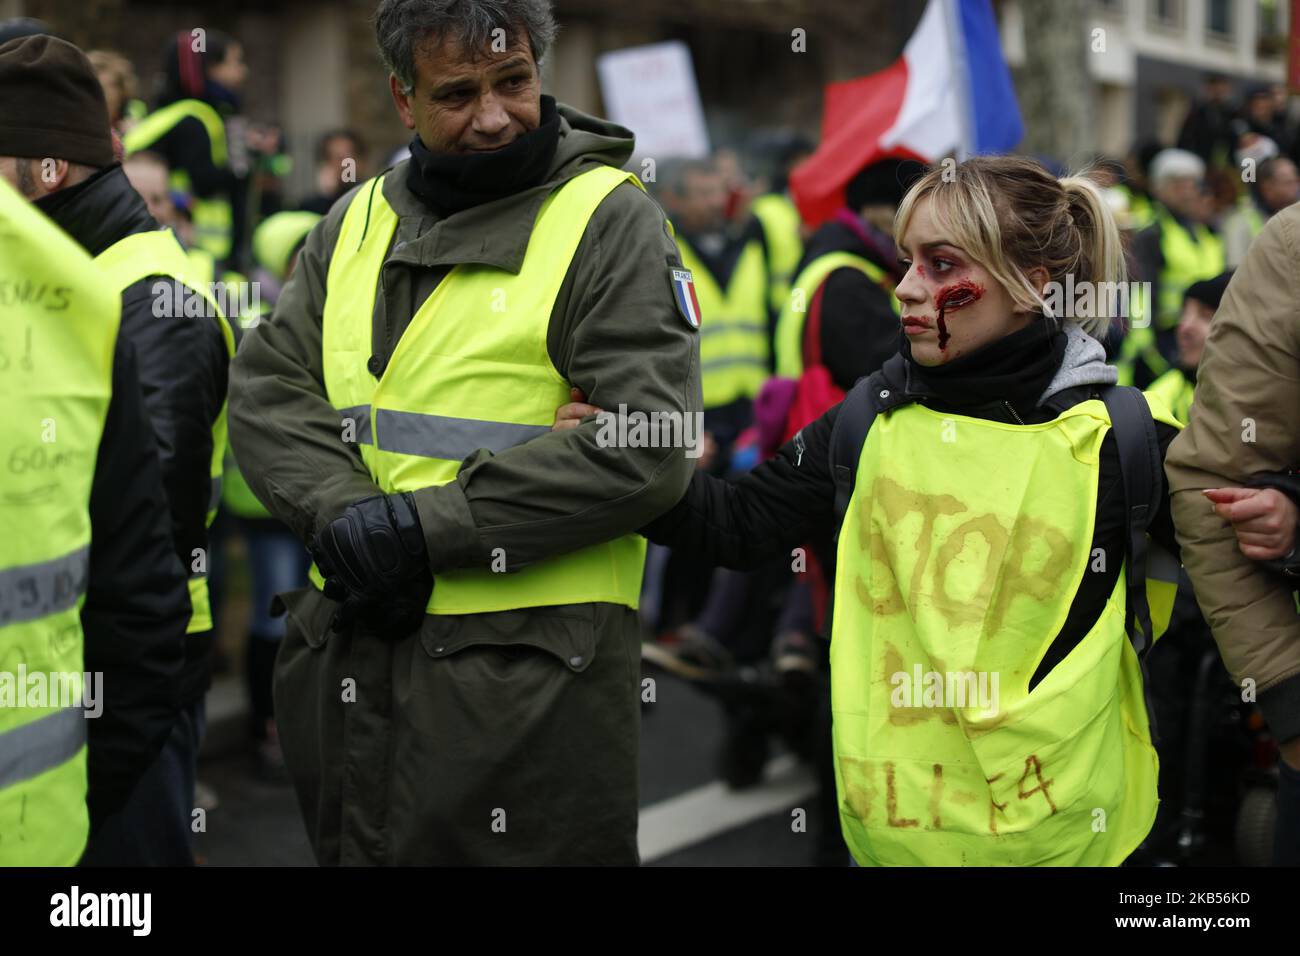 Protesters take part in an anti-government demonstration called by the "gilet  jaune" (yellow vest) movement in Paris, France, on February 2, 2019. The  'Yellow Vest' (Gilets Jaunes) movement in France originally started